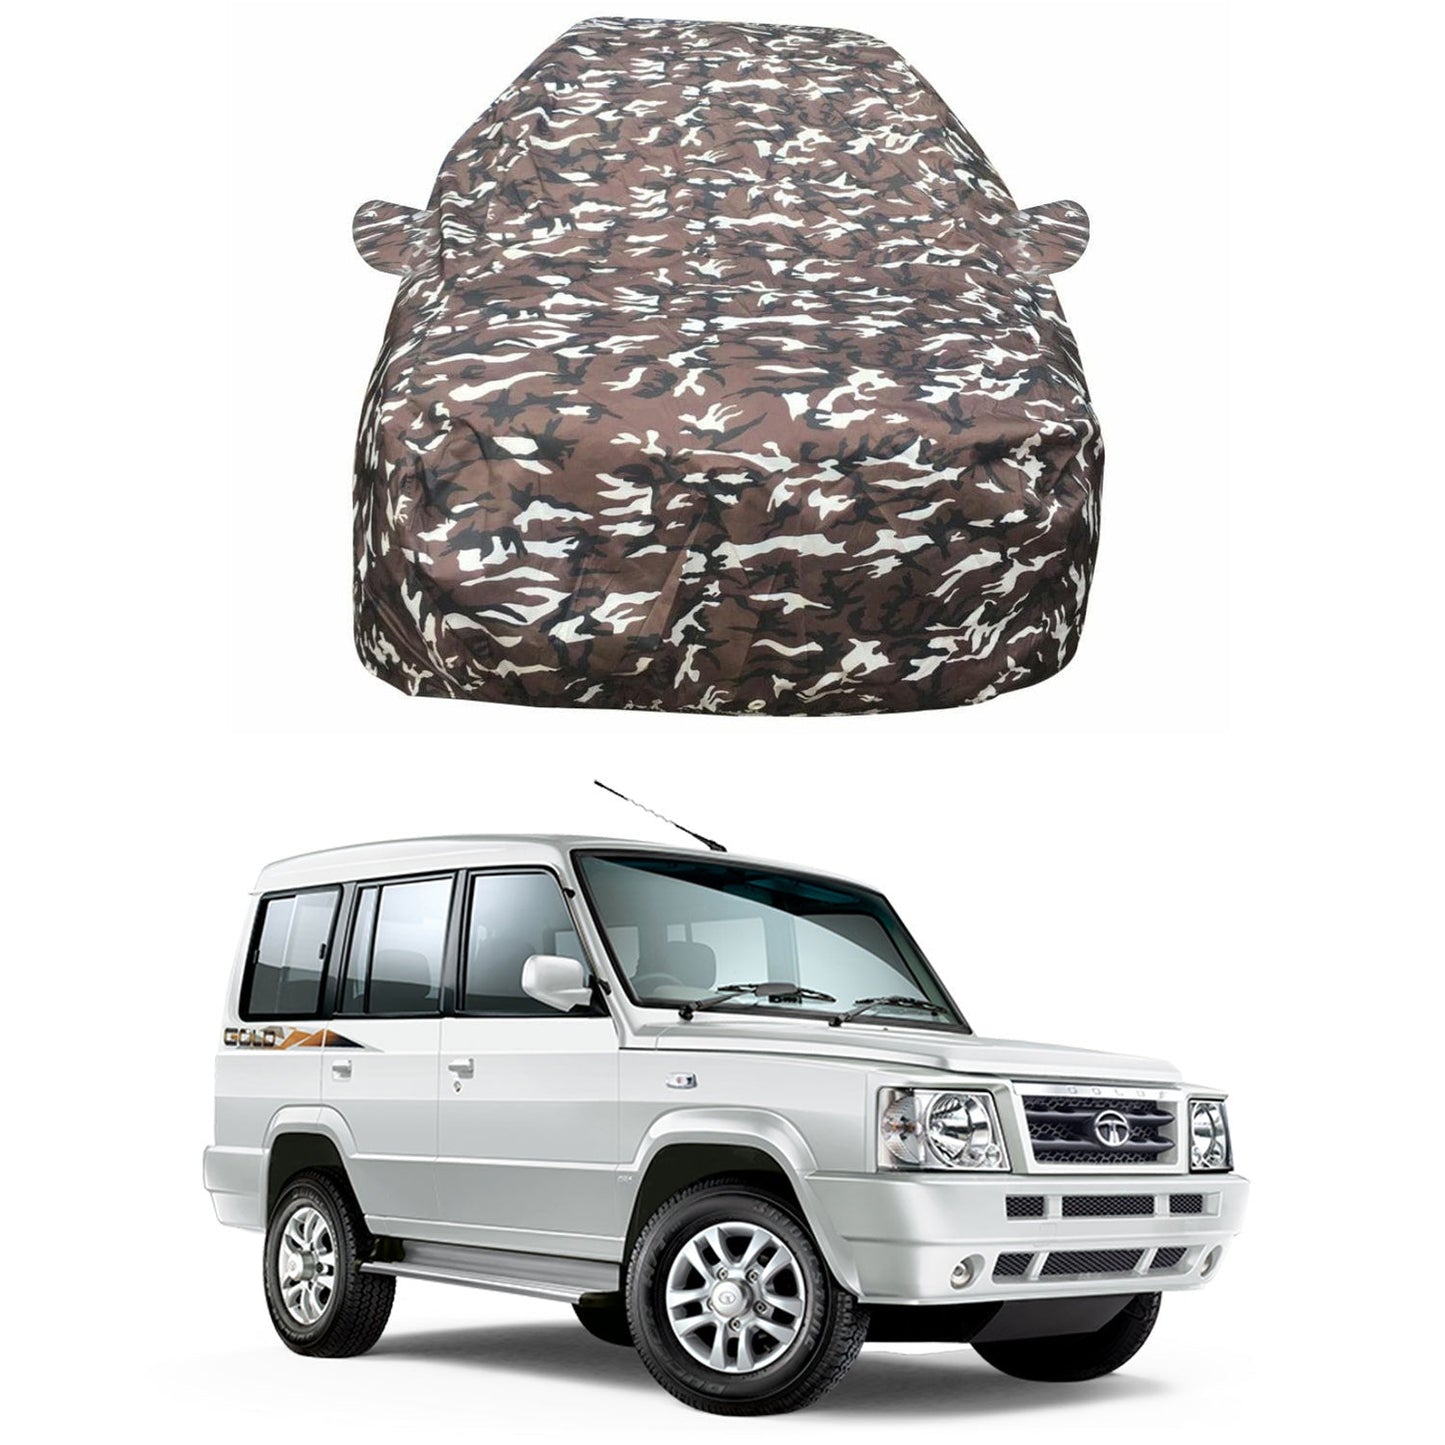 Oshotto Ranger Design Made of 100% Waterproof Fabric Multicolor Car Body Cover with Mirror Pocket For Tata Sumo/Victa